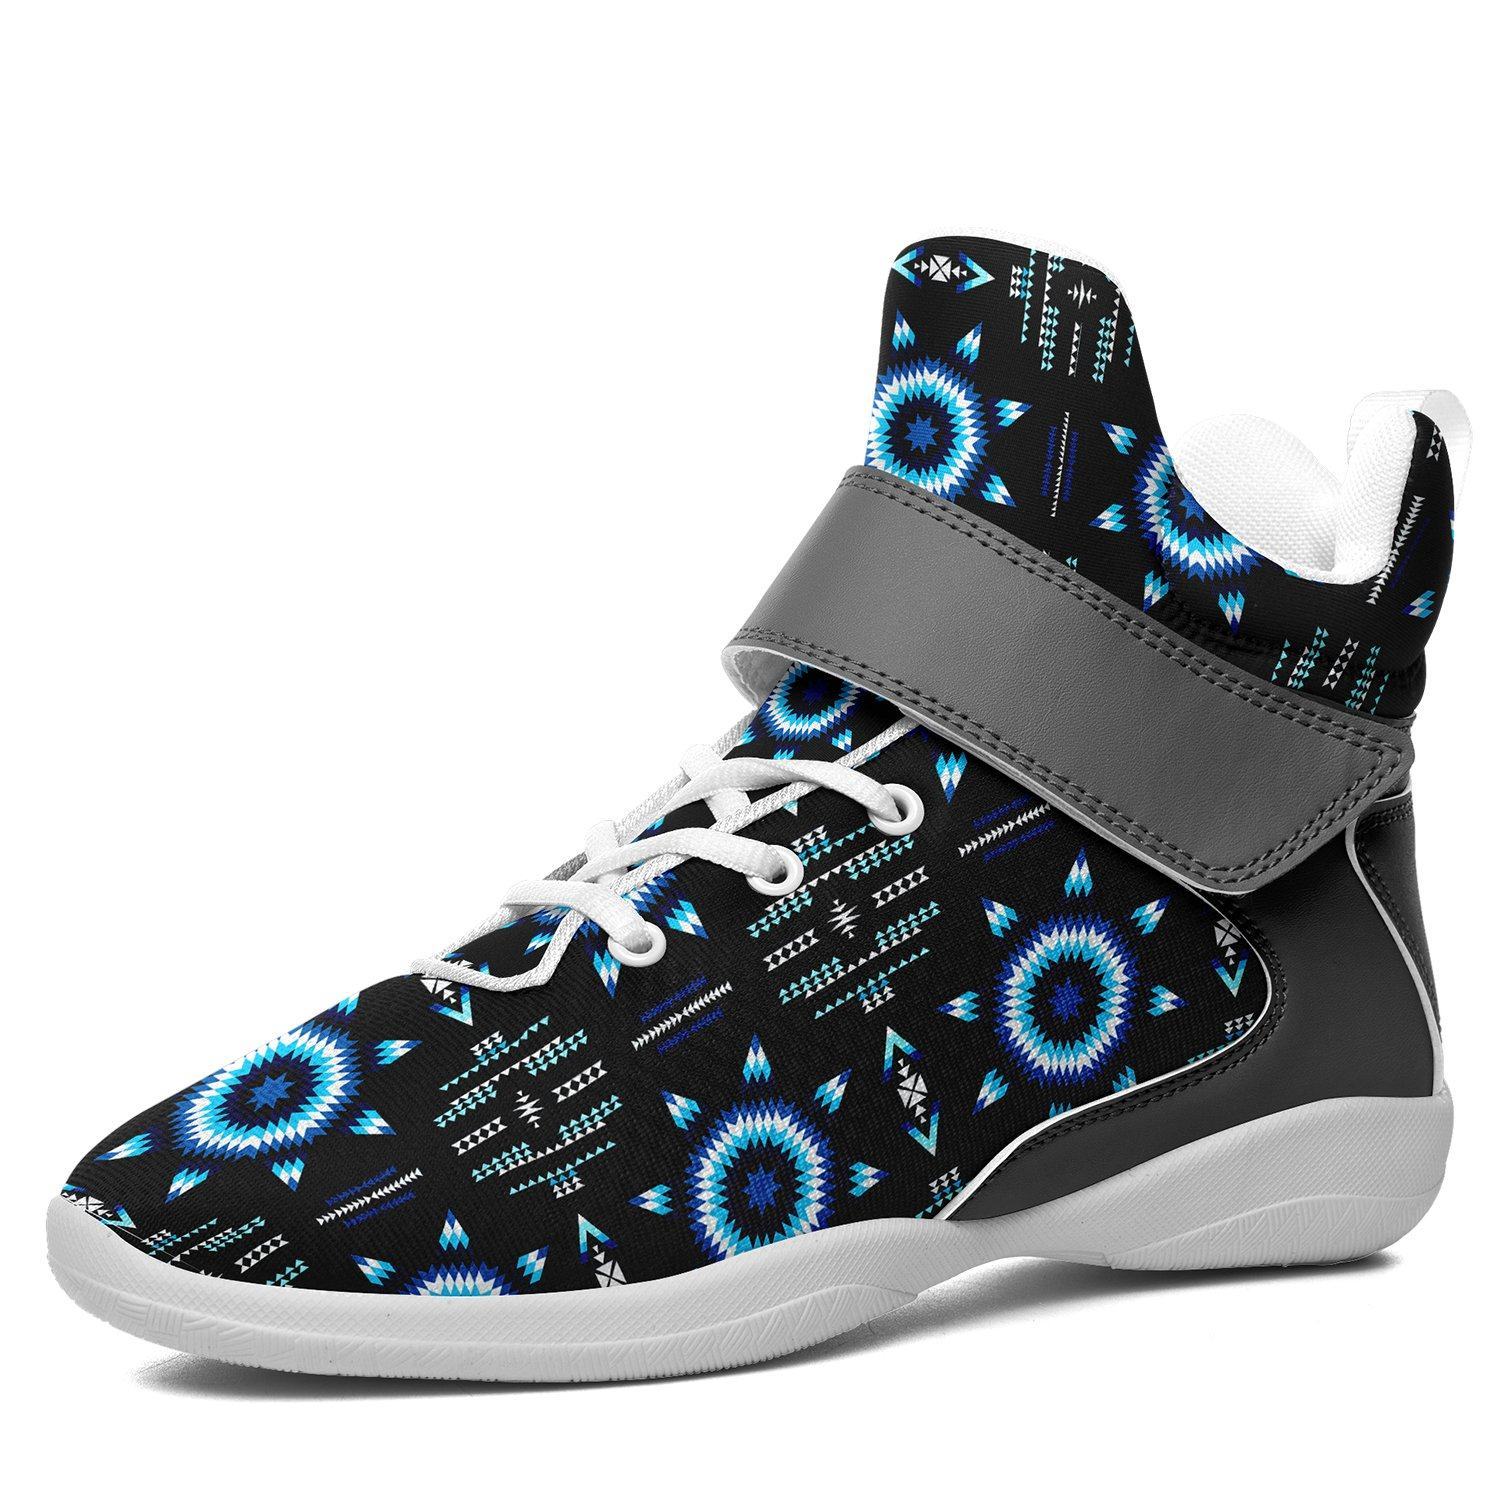 Rising Star Wolf Moon Ipottaa Basketball / Sport High Top Shoes - White Sole 49 Dzine US Men 7 / EUR 40 White Sole with Gray Strap 